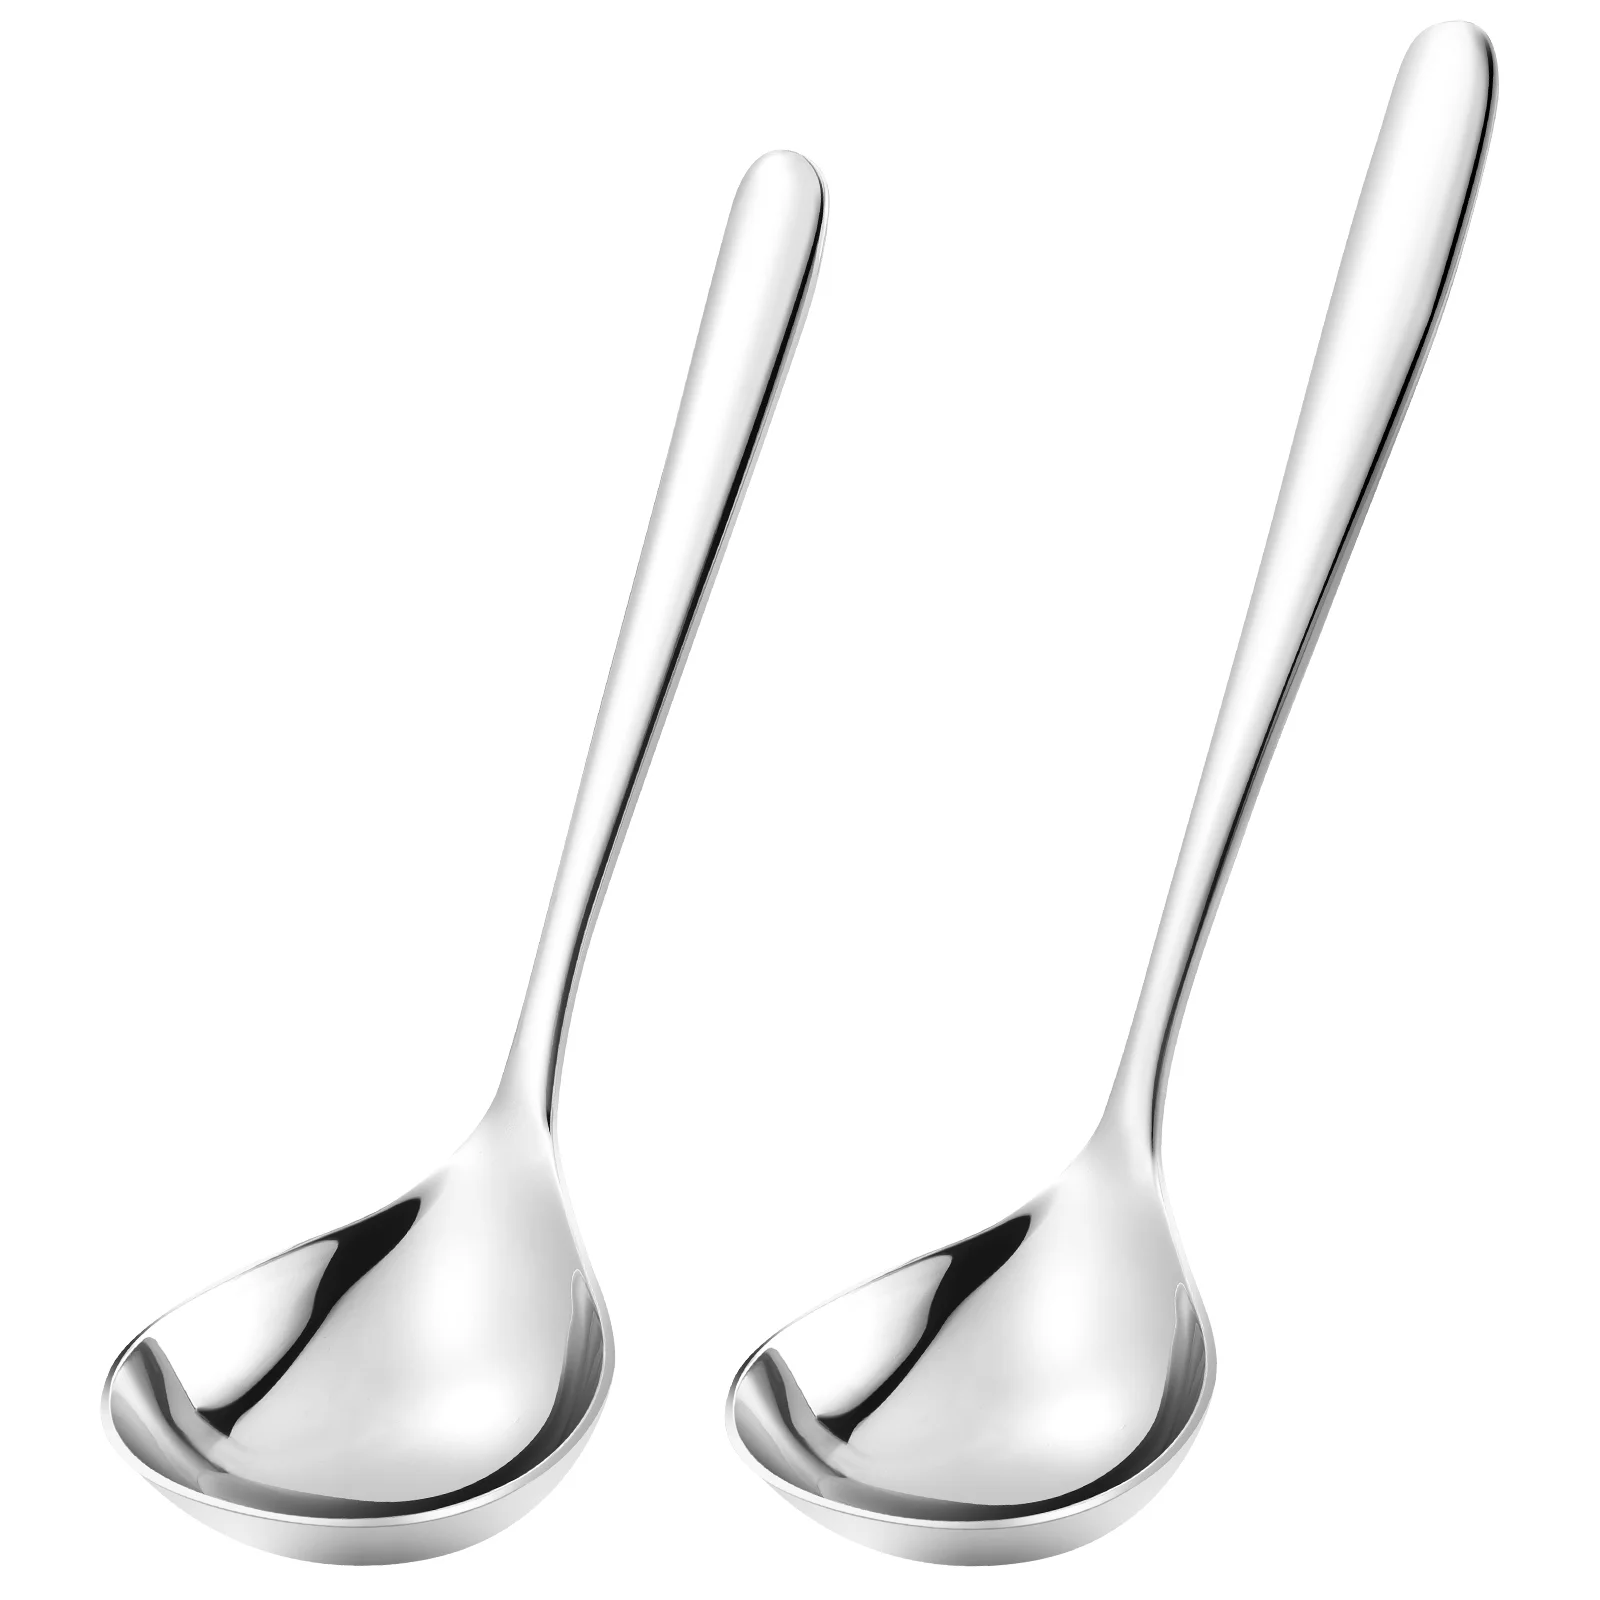 

2 Pcs Stainless Steel Soup Spoon Western Food Serving Spoons Salad Utensils Oversized No-rust Ladle Asian